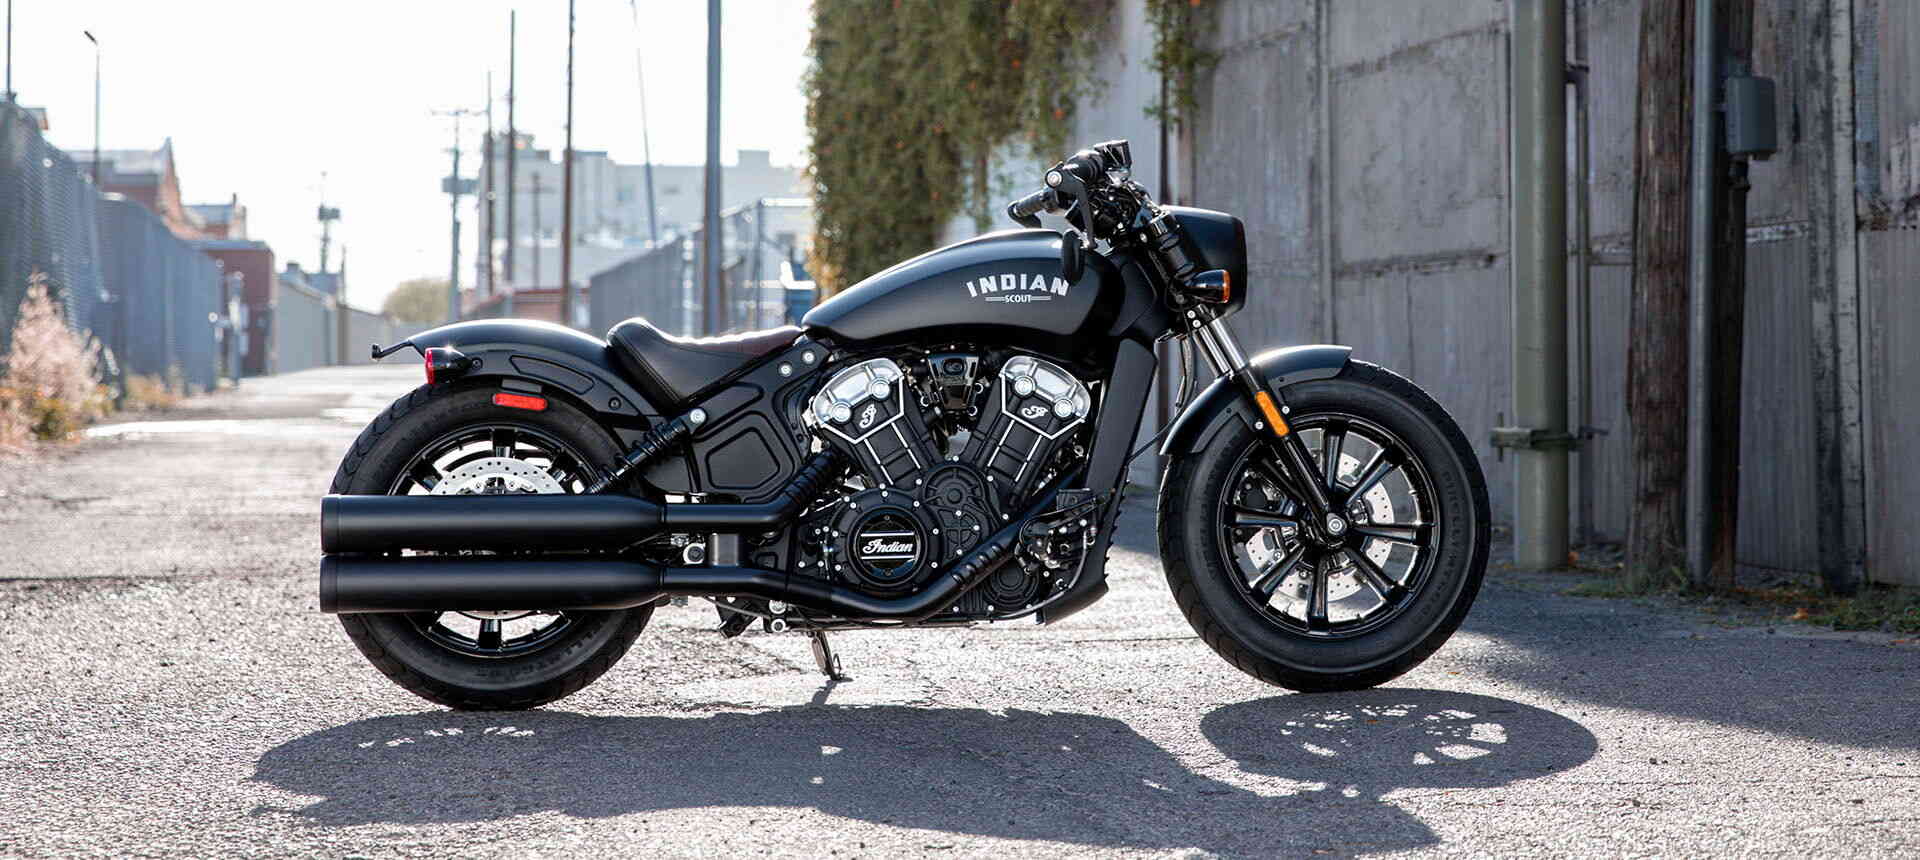 Indian Scout Bobber Motorcycle